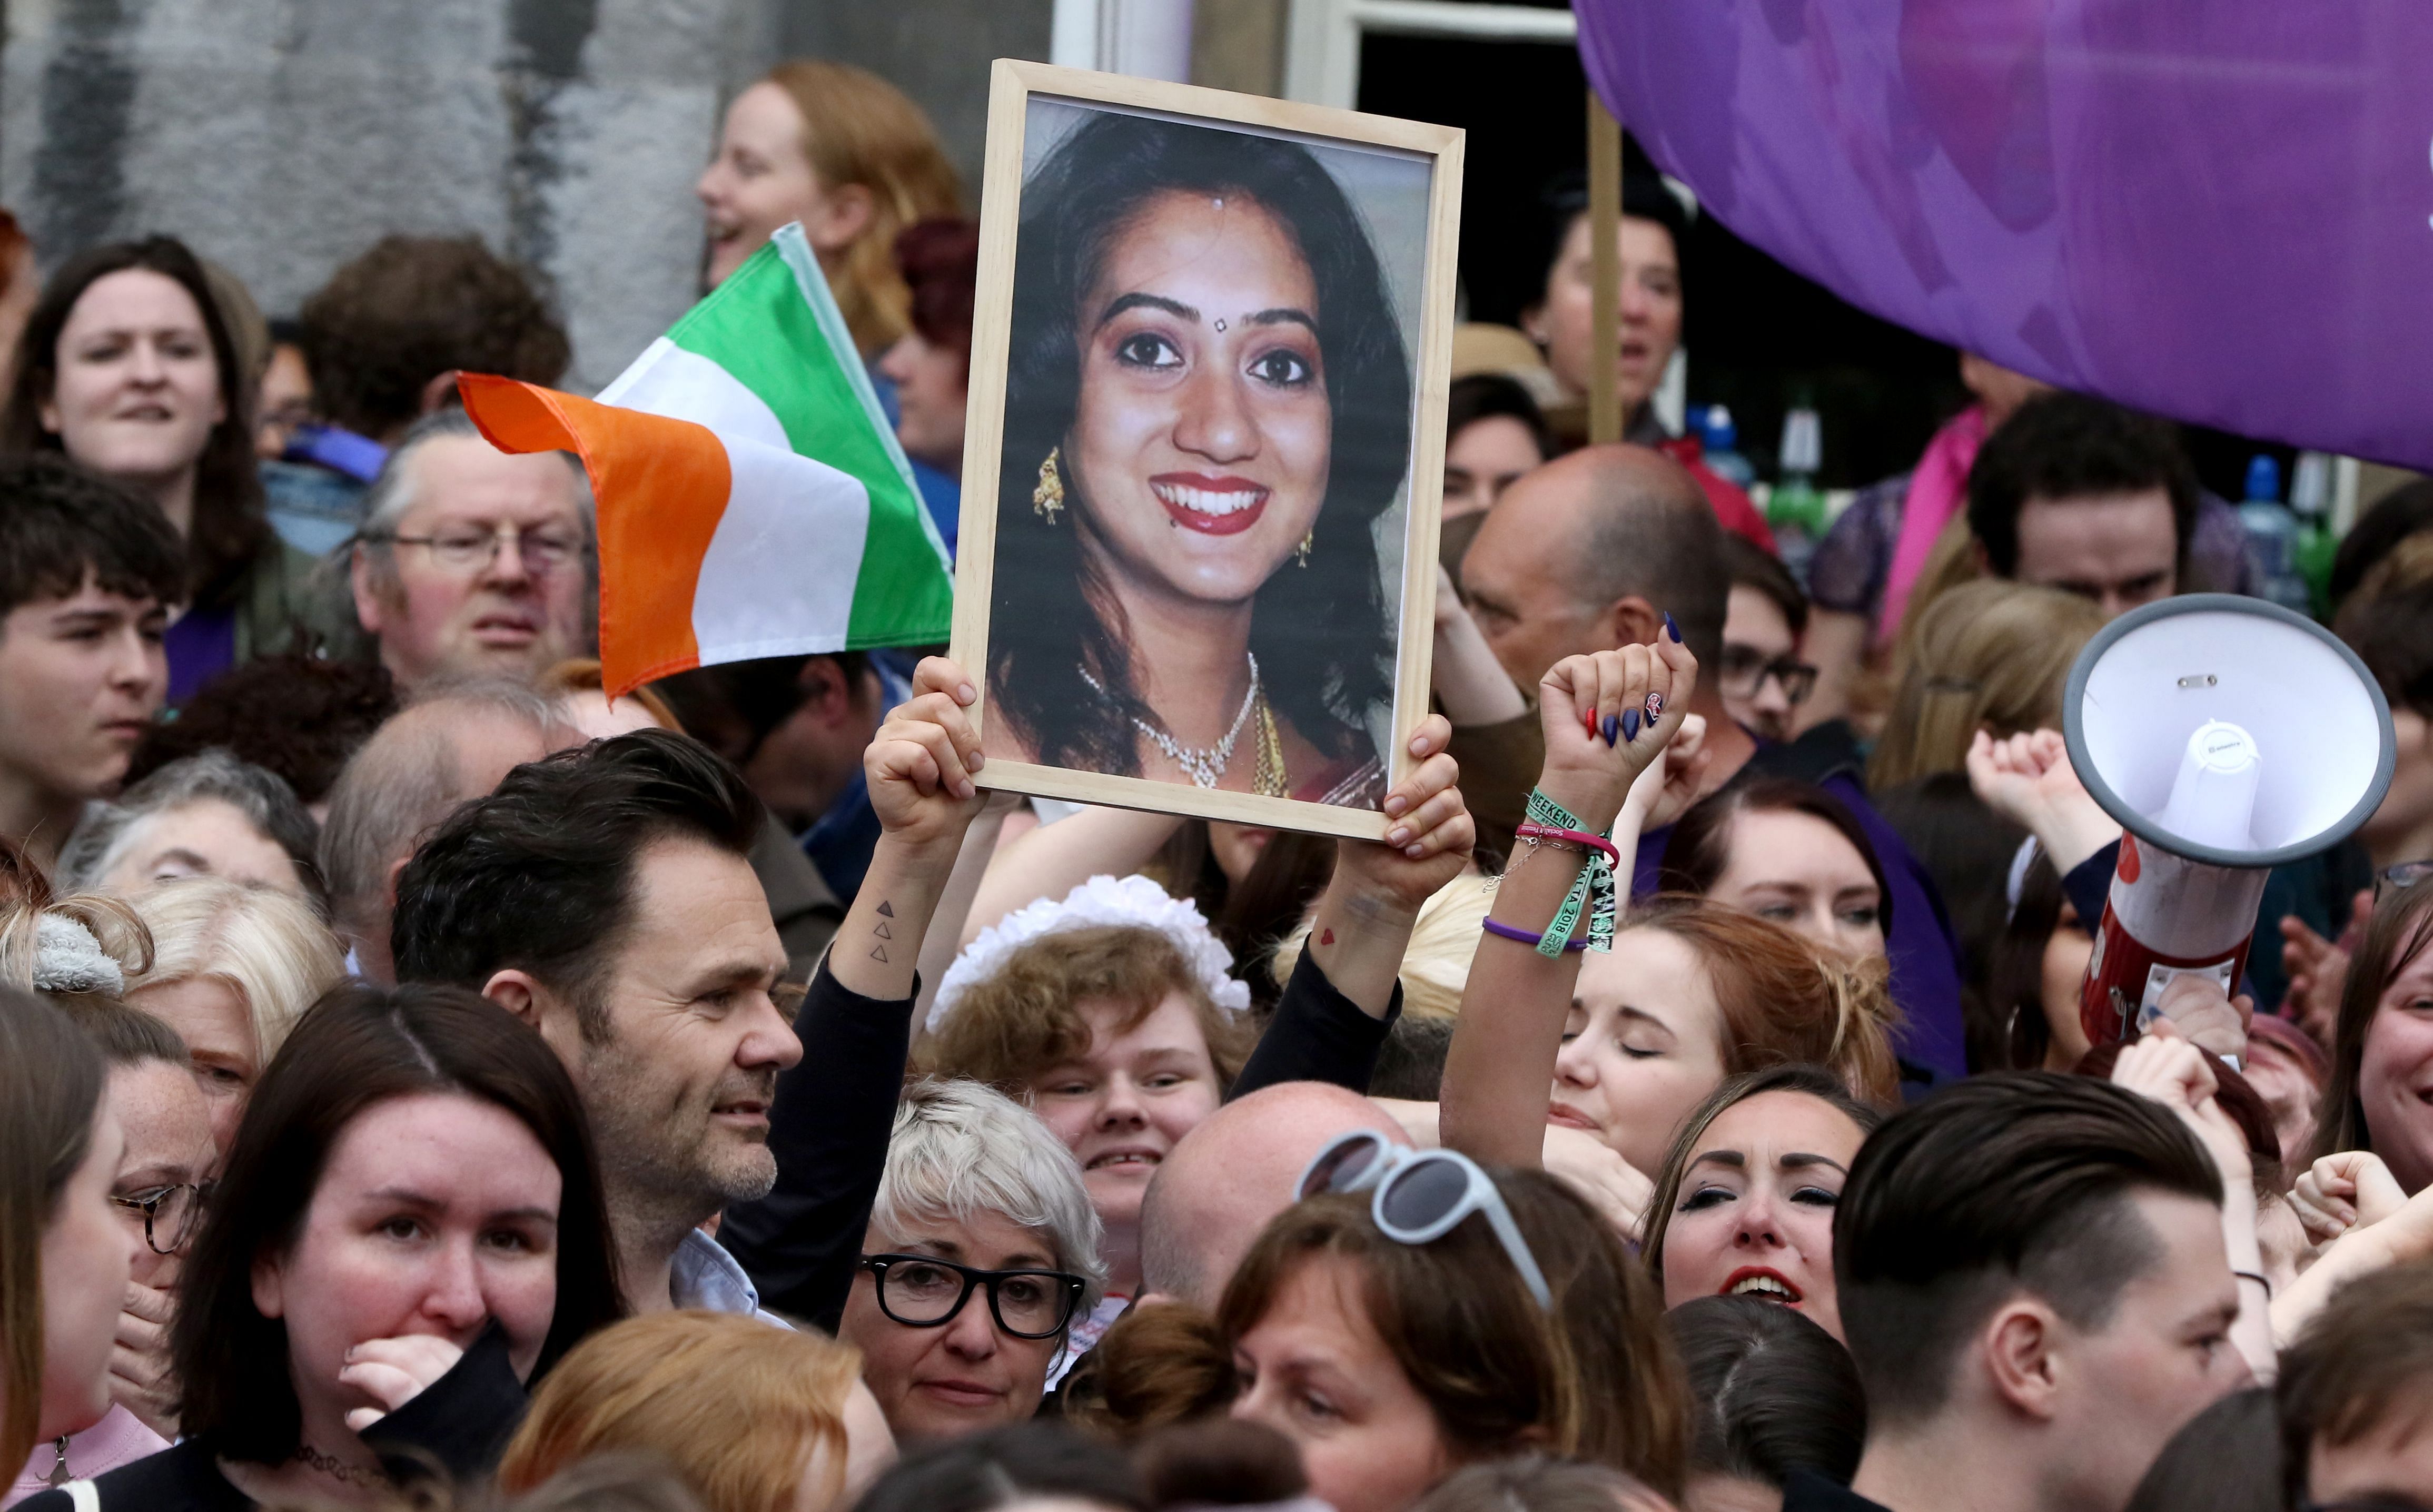 A demonstration at Dublin Castle ahead of the referendum on May 26. Savita Halappanavar has become an icon for abortion activists, who have won a major battle.